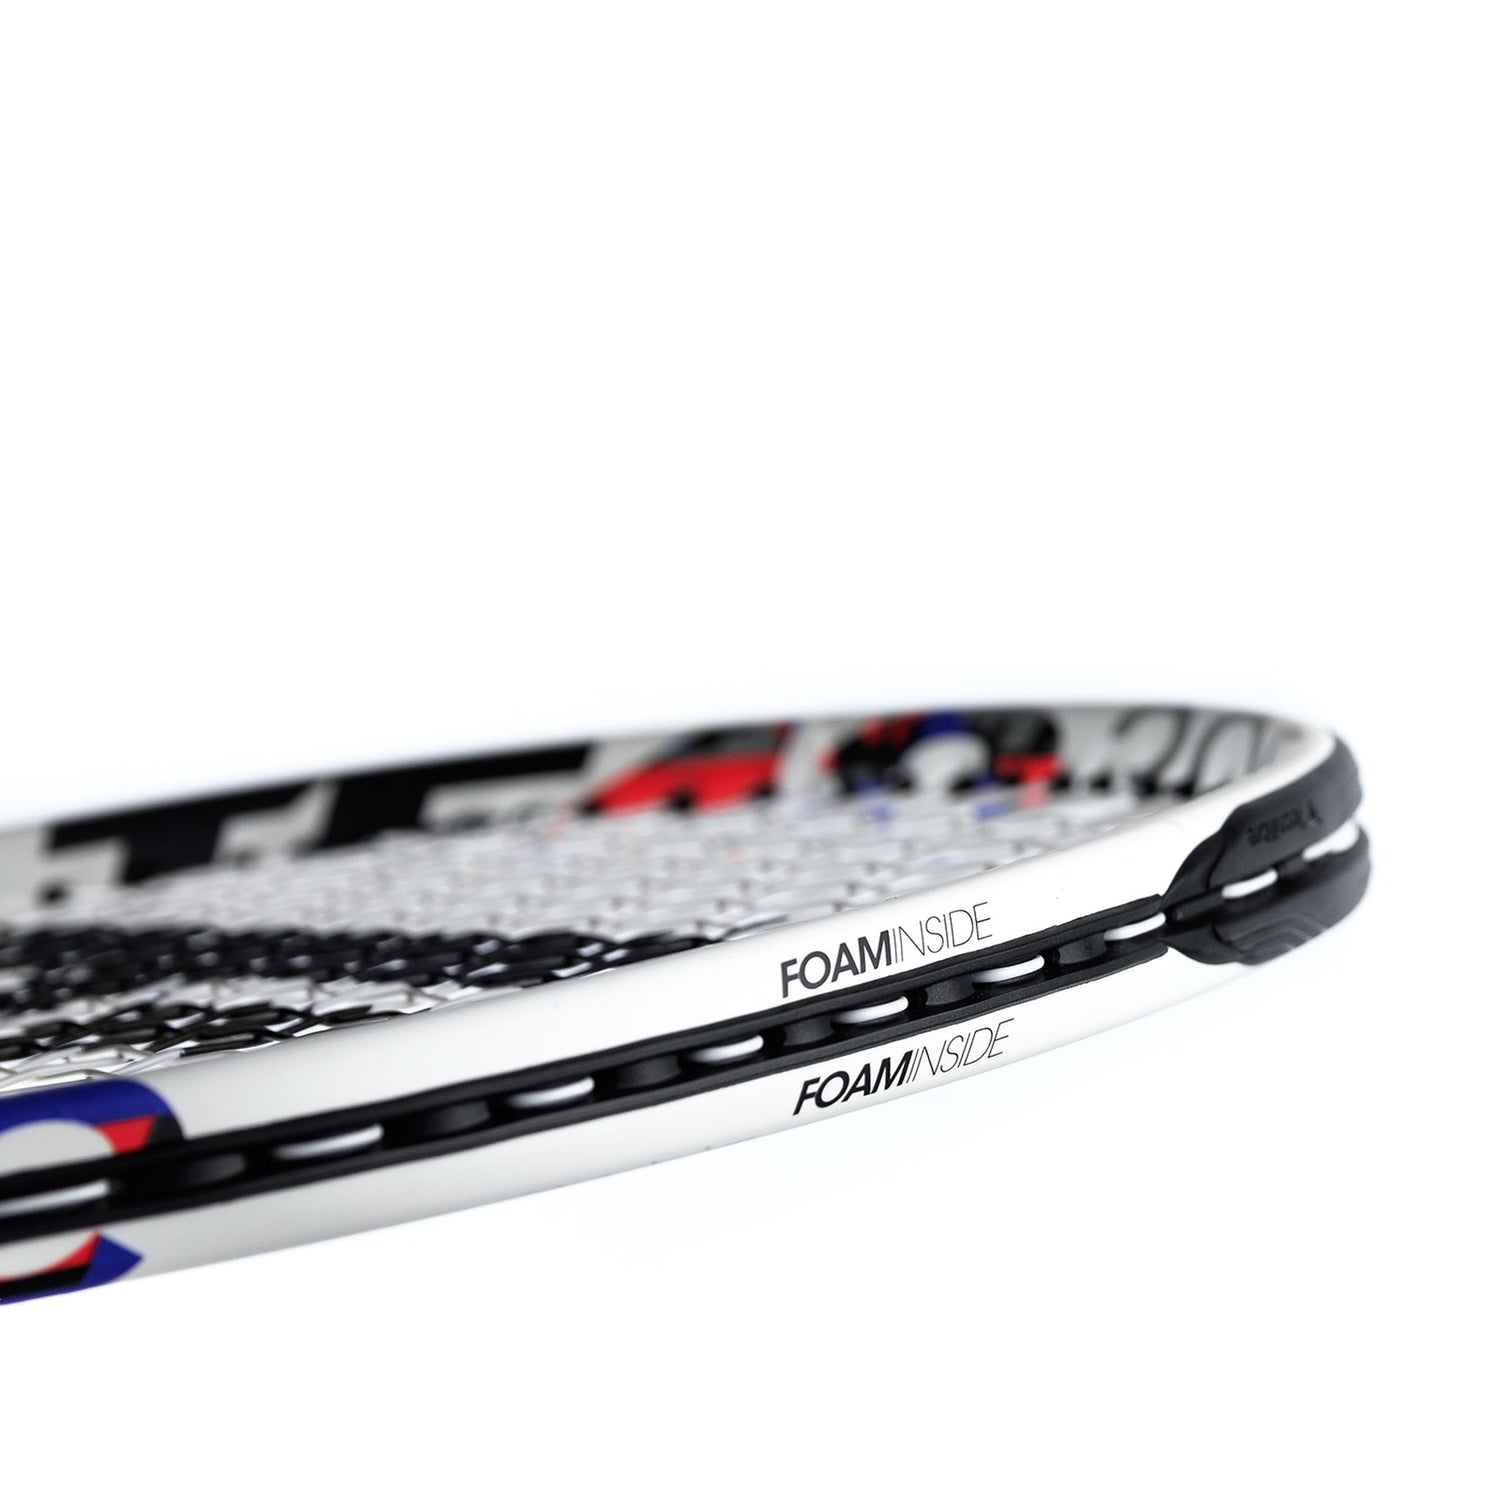 Close-up of the wider and longer Extense BG grommets of the TF40 305 tennis racket